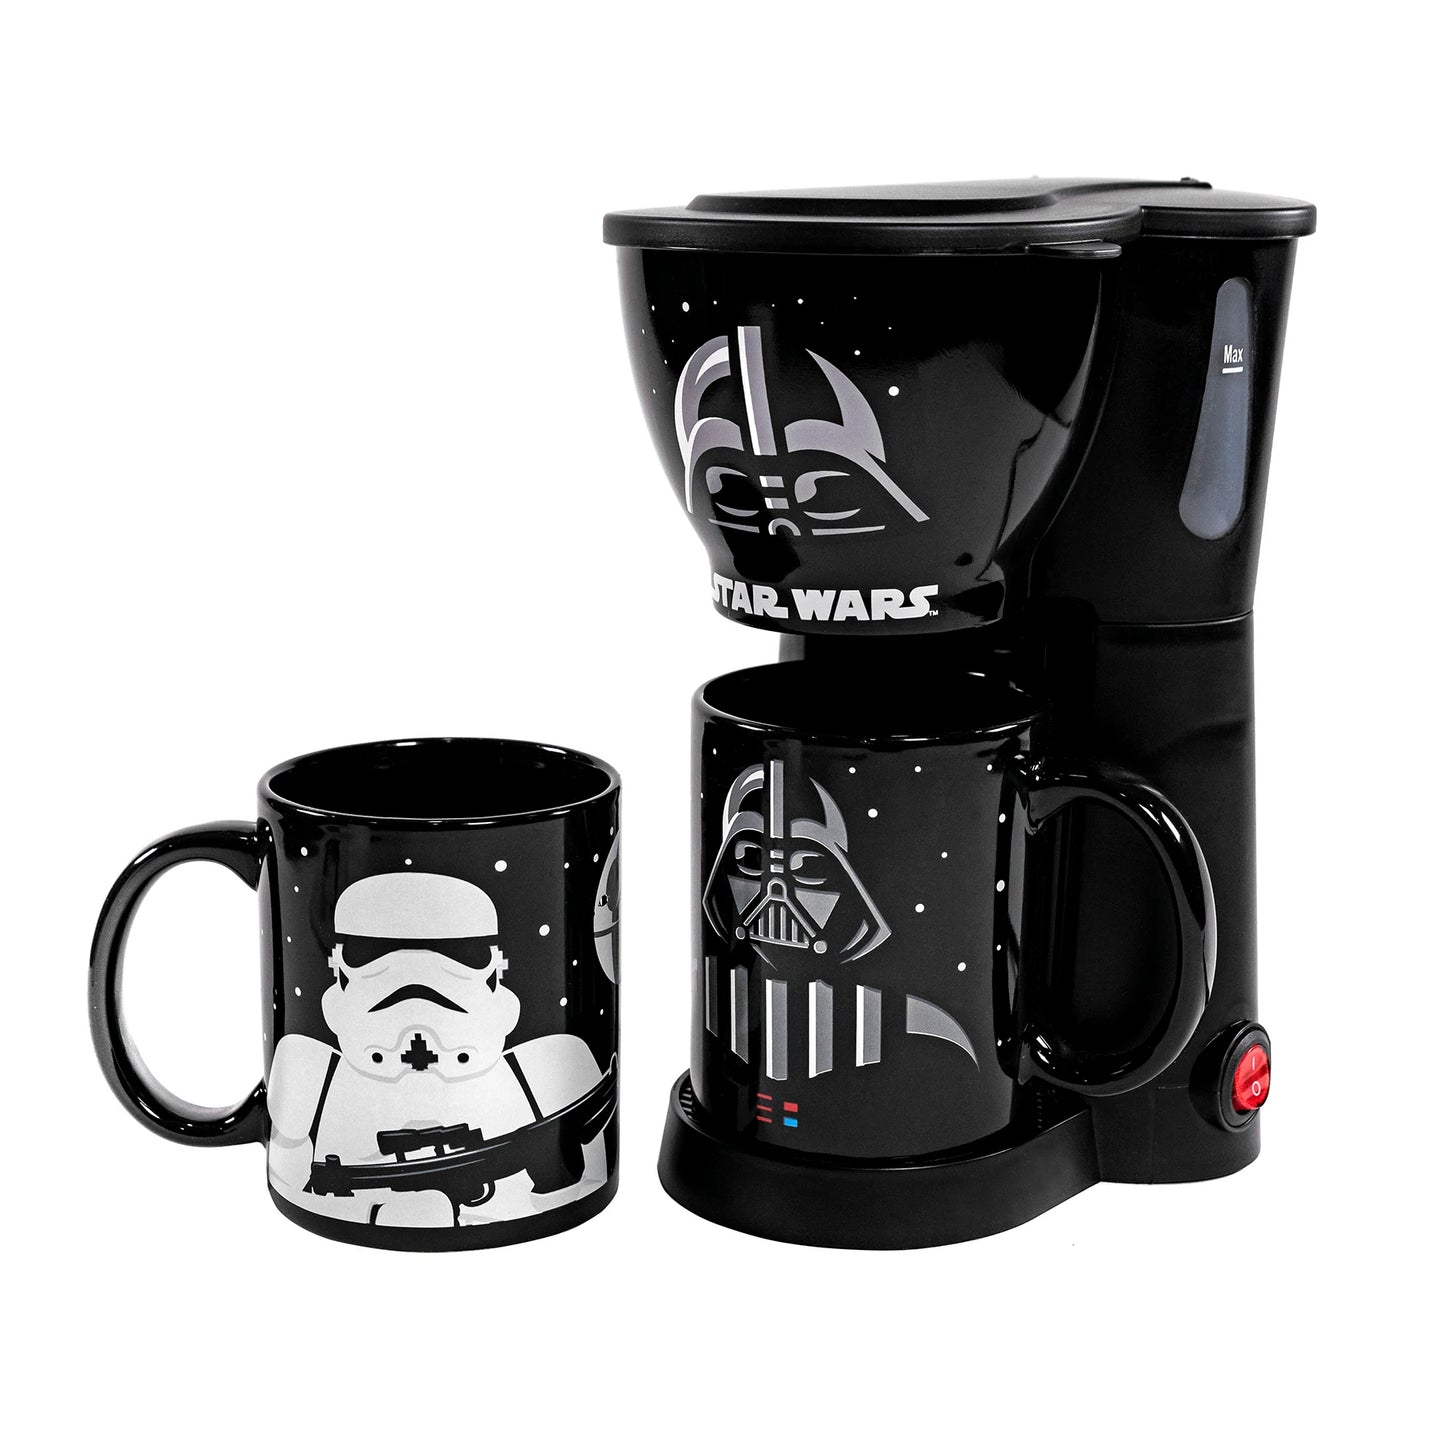 Darth Vader & Stormtrooper (Star Wars) Single Cup Coffee Maker Gift Set with Mugs